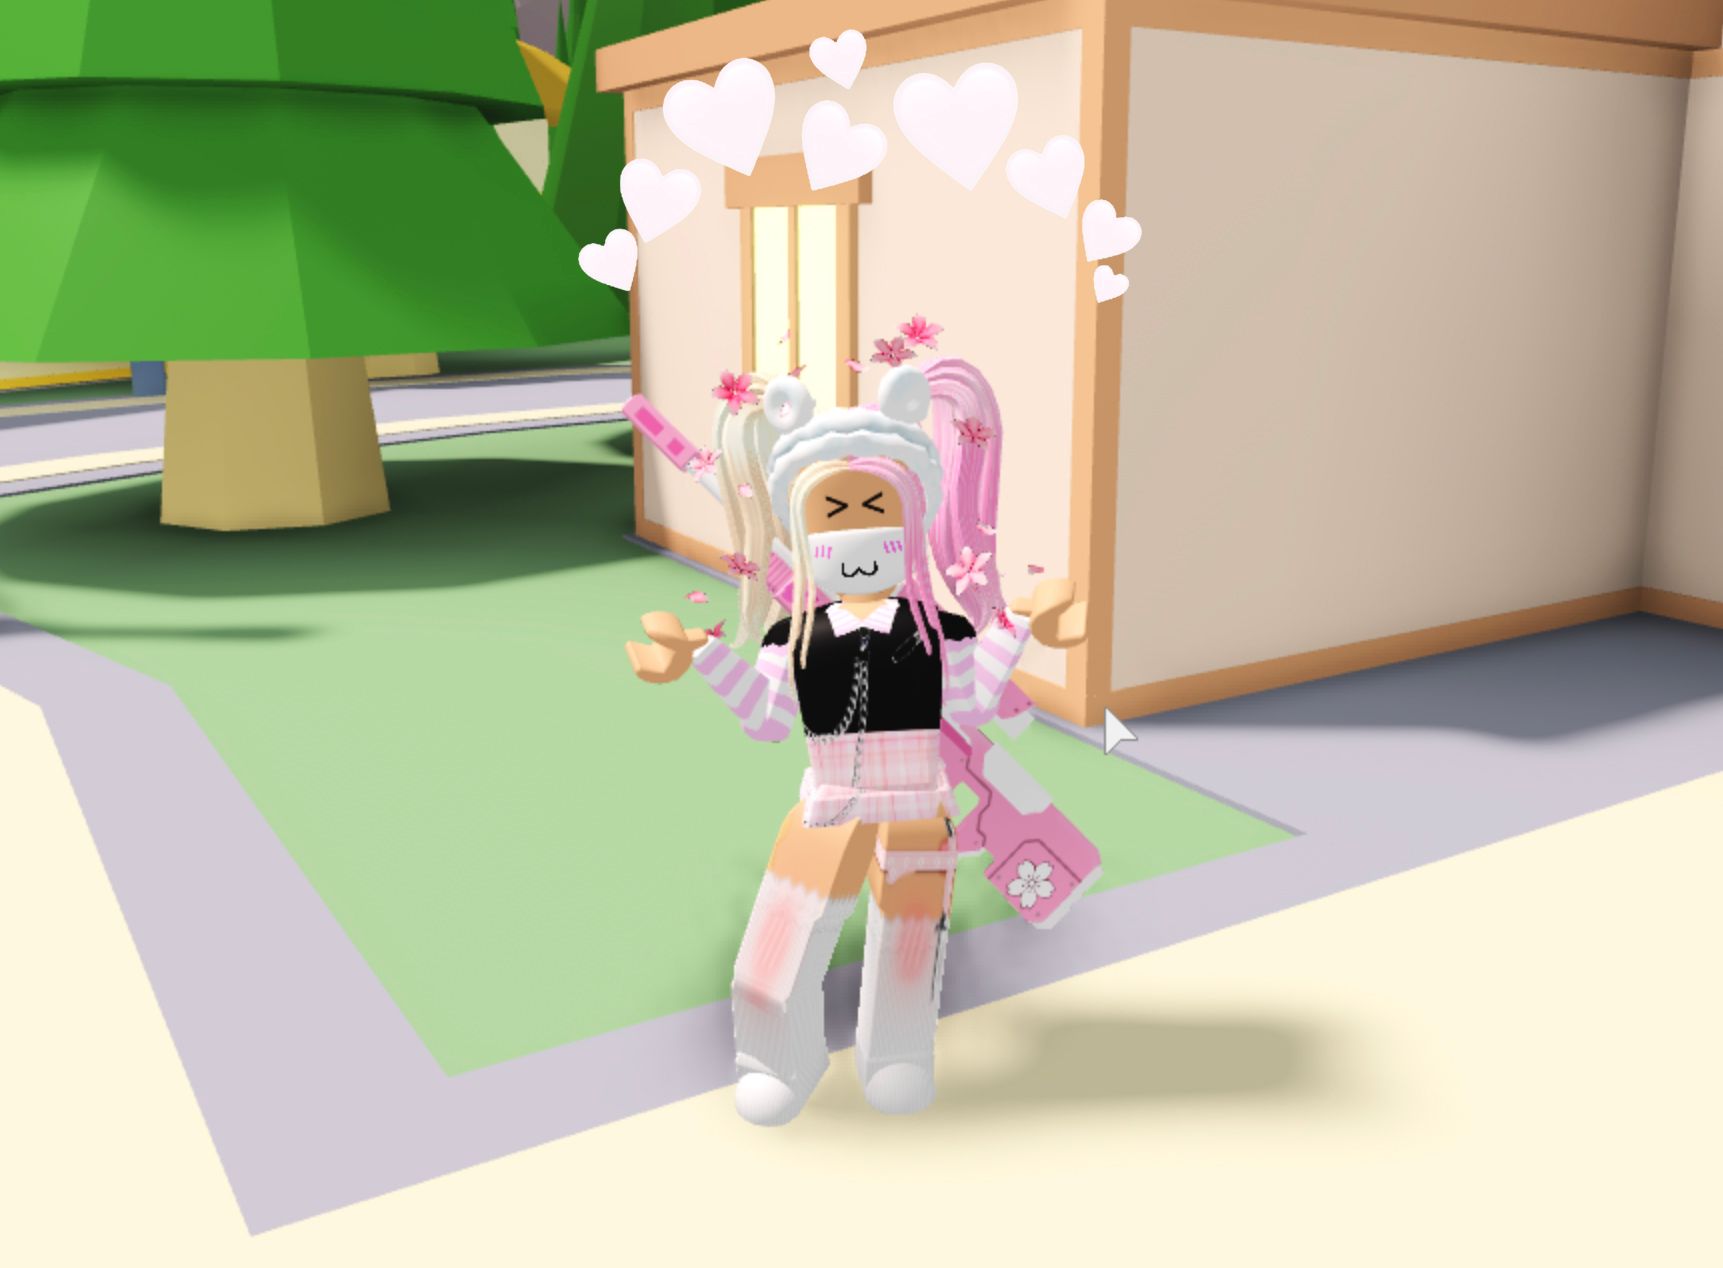 EPAL – 🎀 𝙆𝙧𝙖𝙘𝙖 *𝓊𝓌𝓊* 🎀 Roblox LFG, Looking for Group